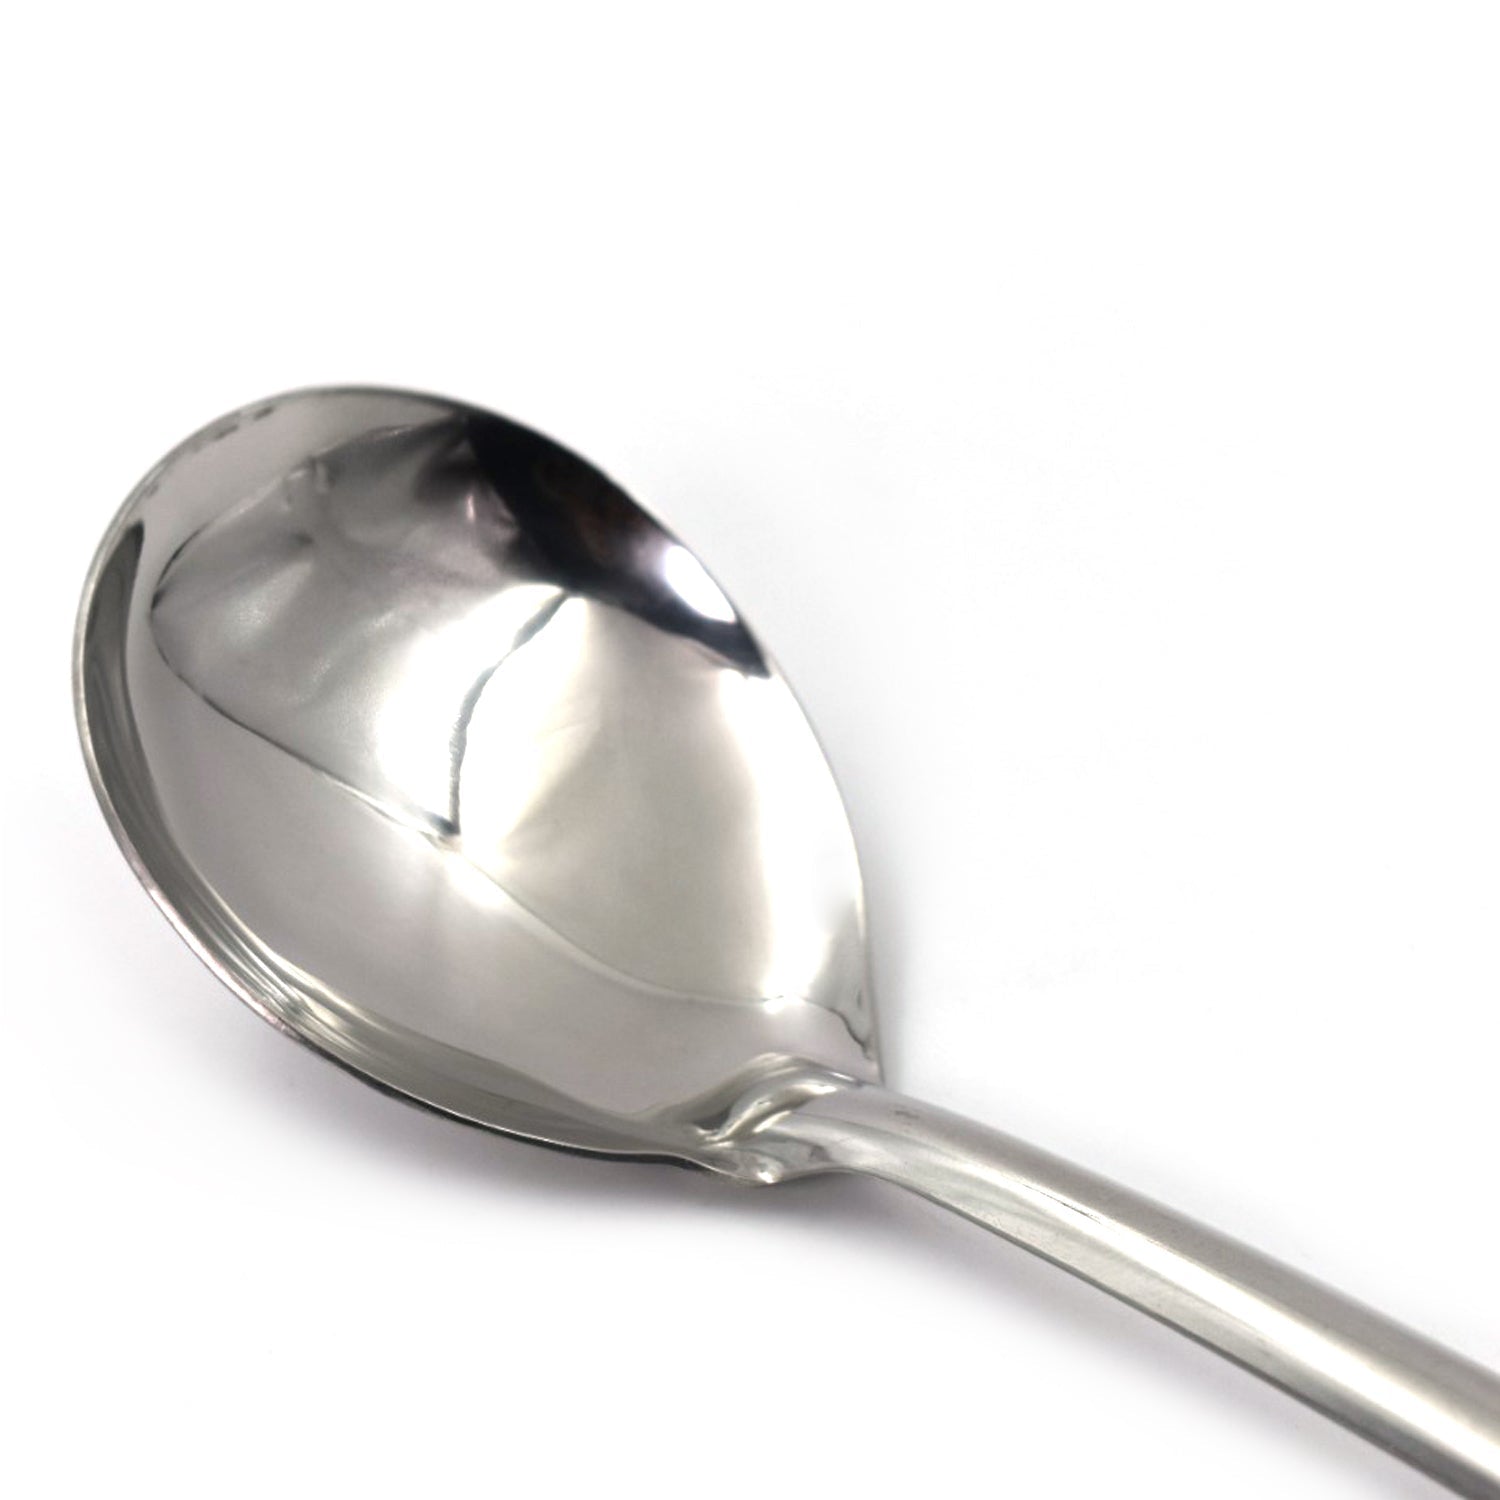 7038 SS Deep Serving Spoon N 1 used in all kinds of household and official places for serving and having food stuffs and items.